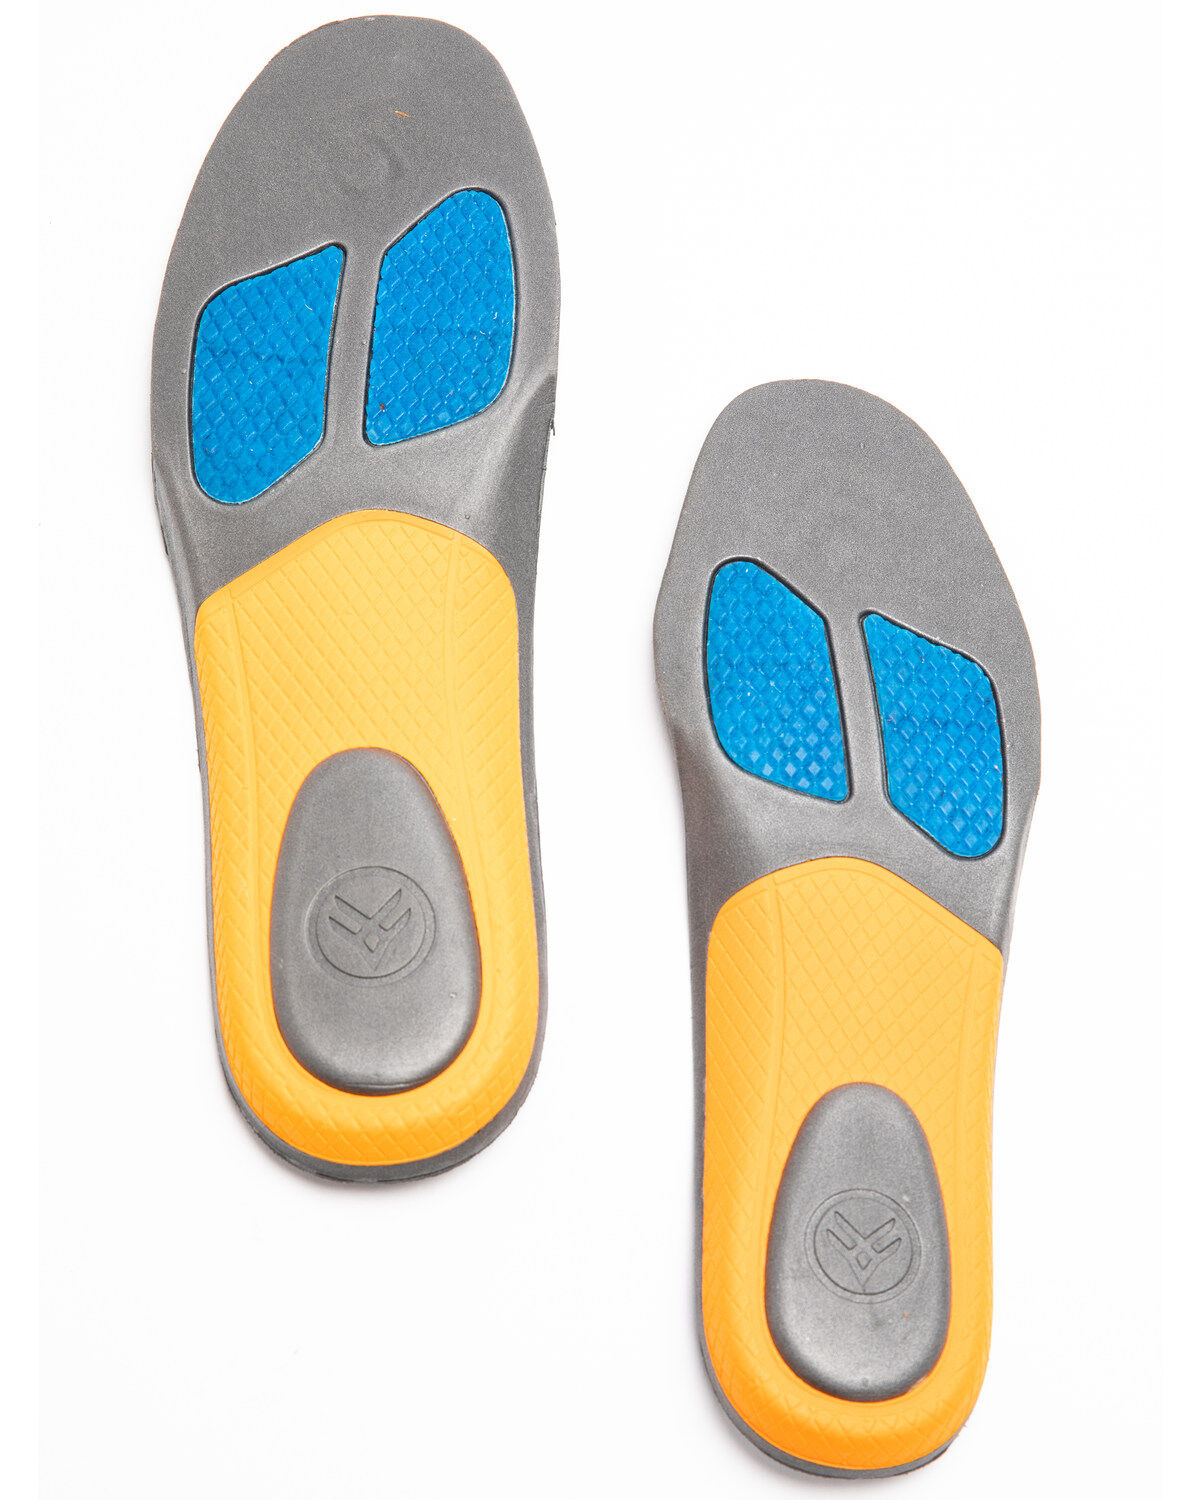 Work Boot Insoles | Boot Barn